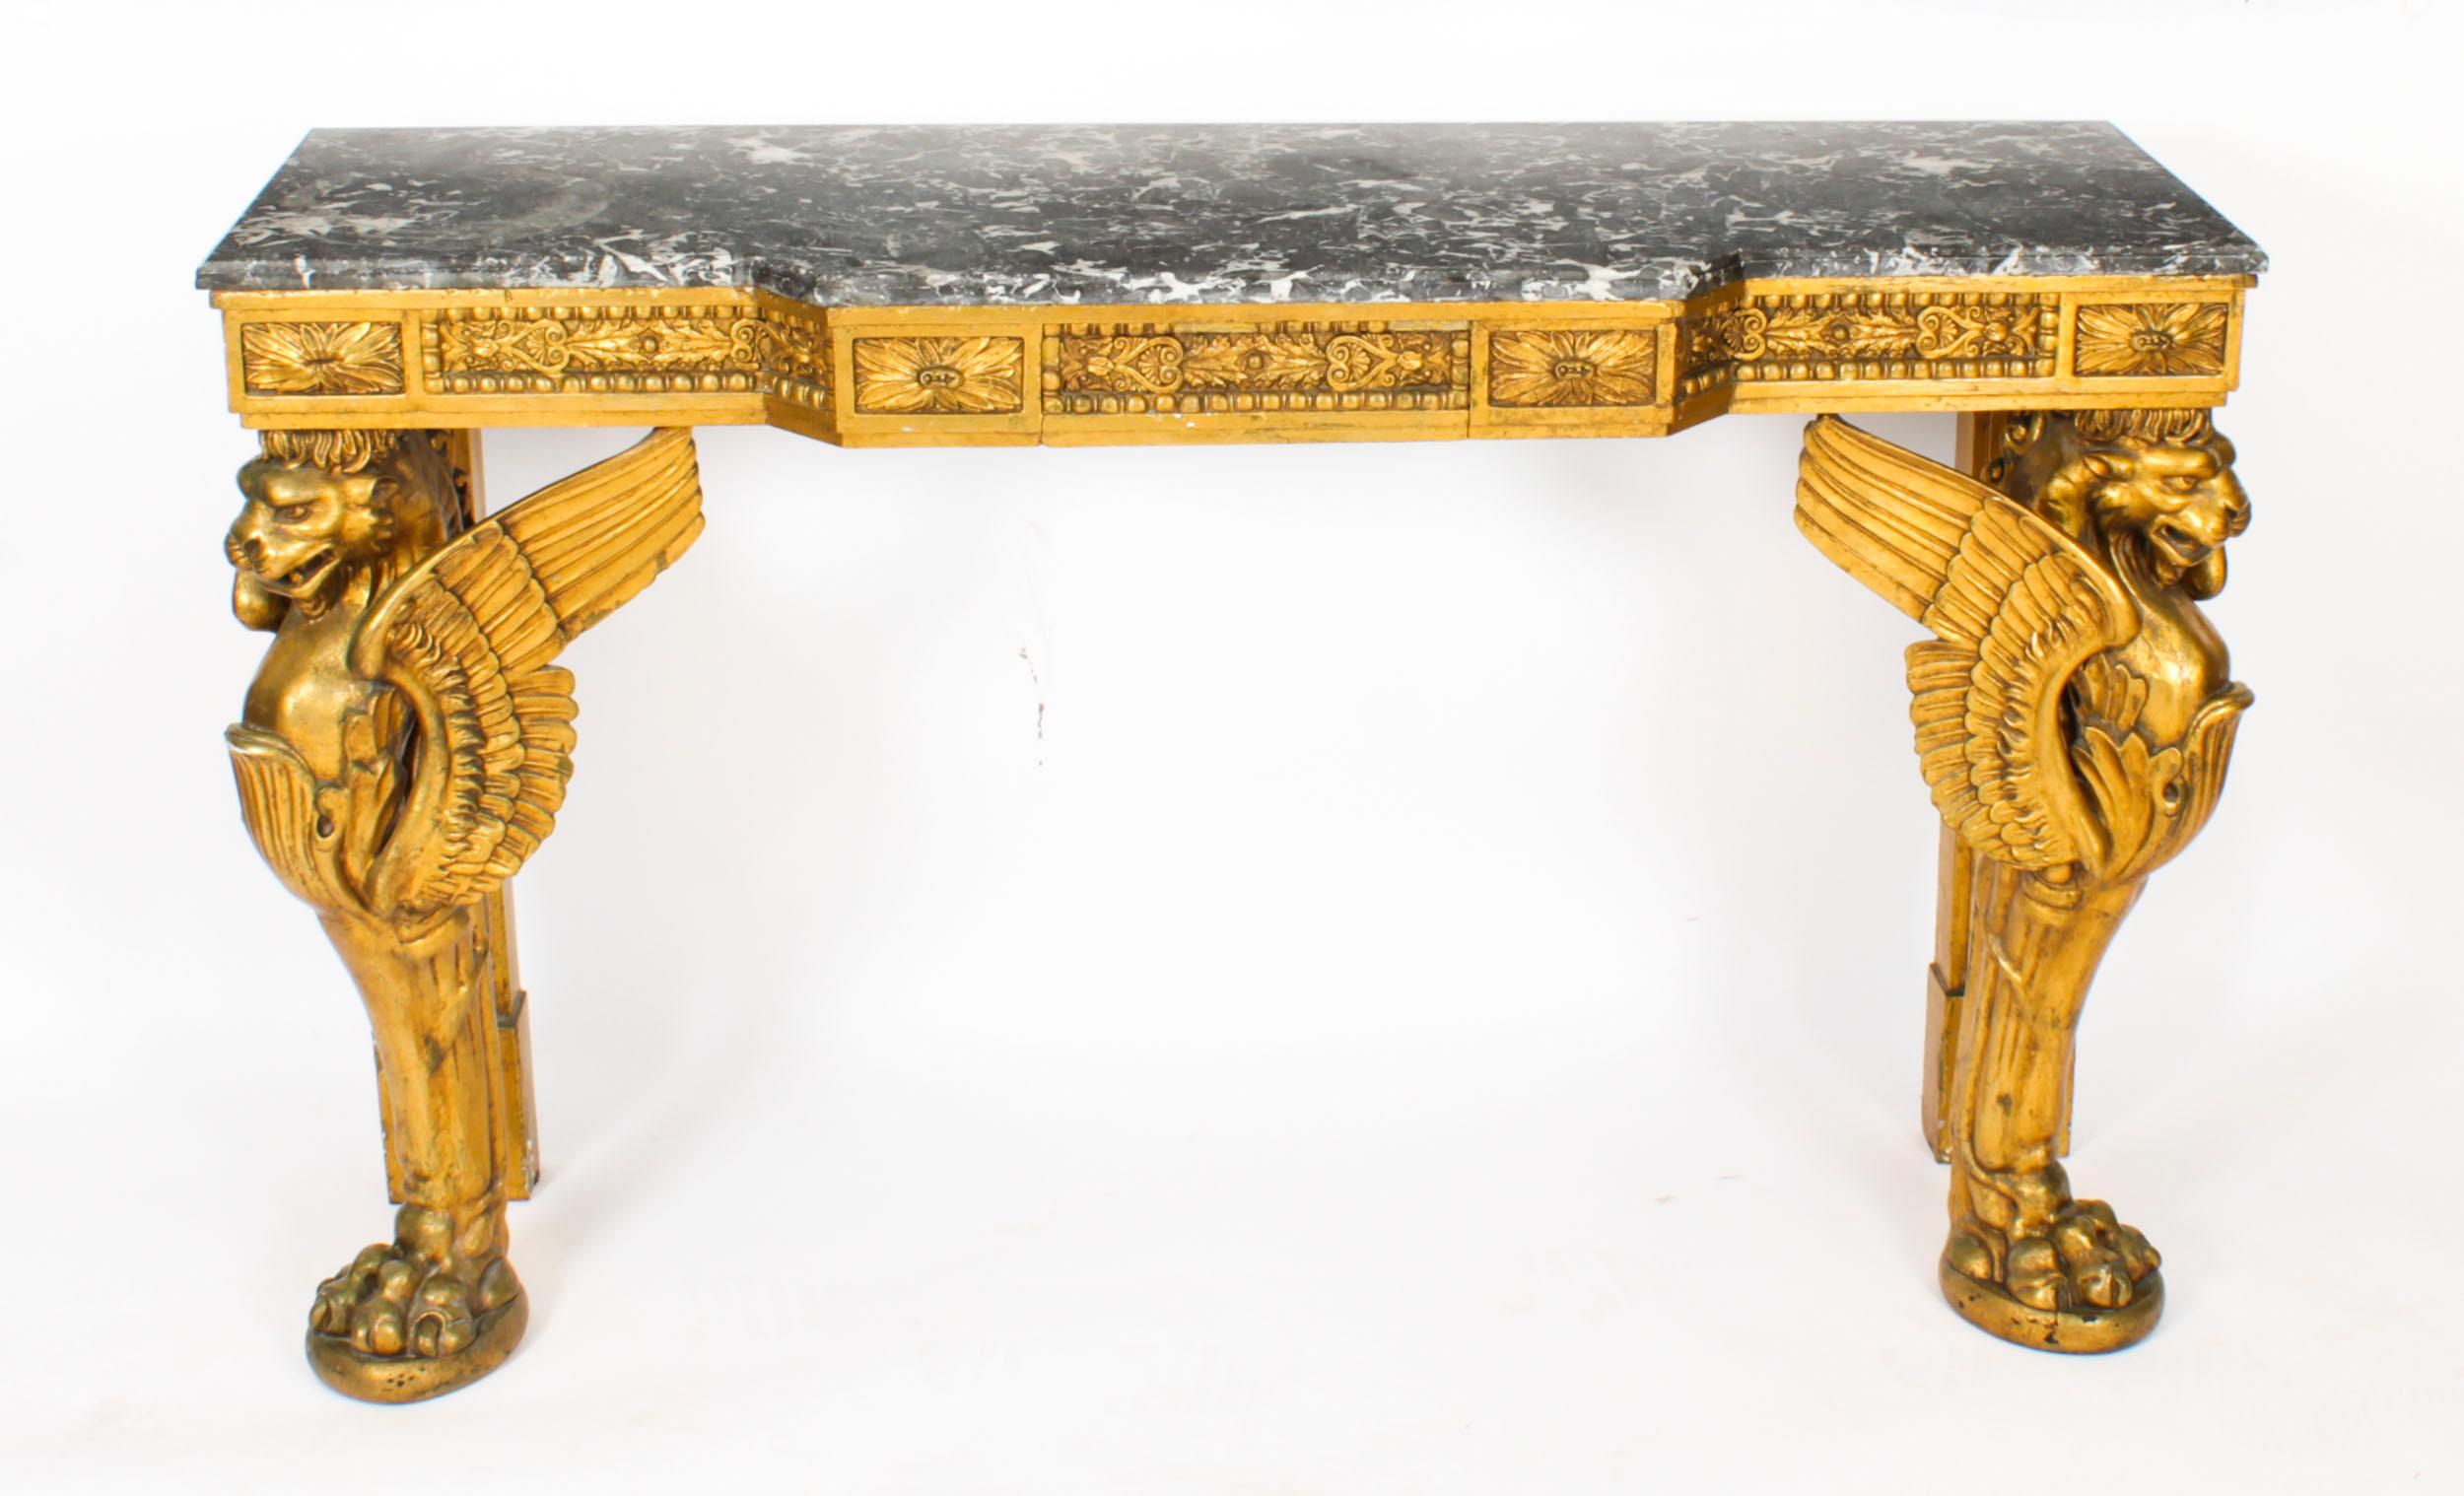 This is a beautiful antique French Neo-Classical giltwood marble topped console table, Circa 1820 in date.
 
The table has a wonderful shaped variegated grey and white grain marble top above a carved and gilded frieze decorated with panels of